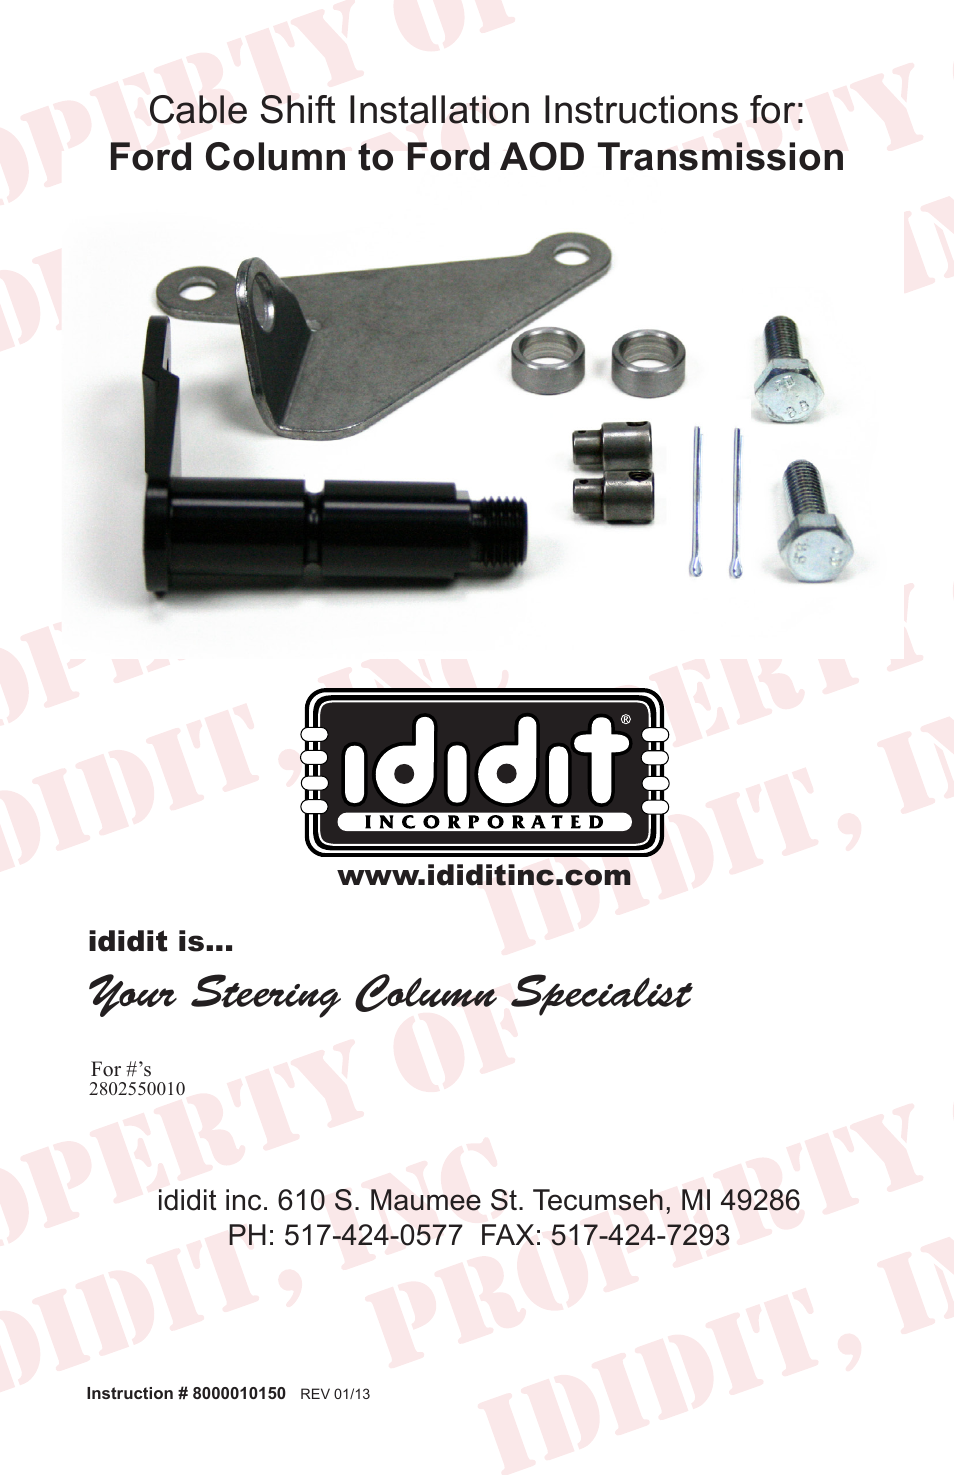 Cable Shift Linkage Kit: Ford Column to Ford AOD Transmission